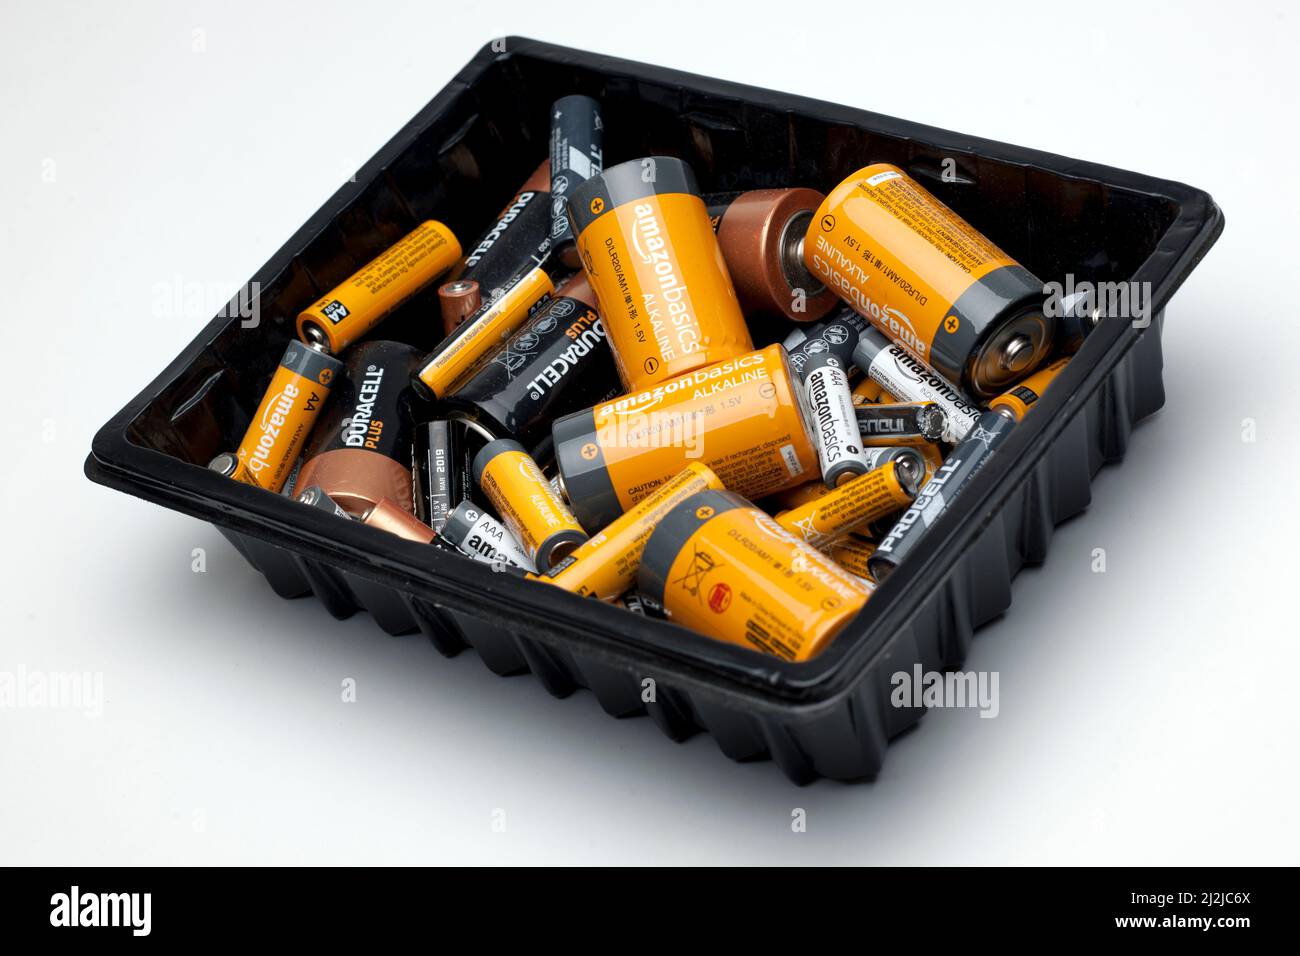 Tray of used Batteries Ready for Recycling Stock Photo